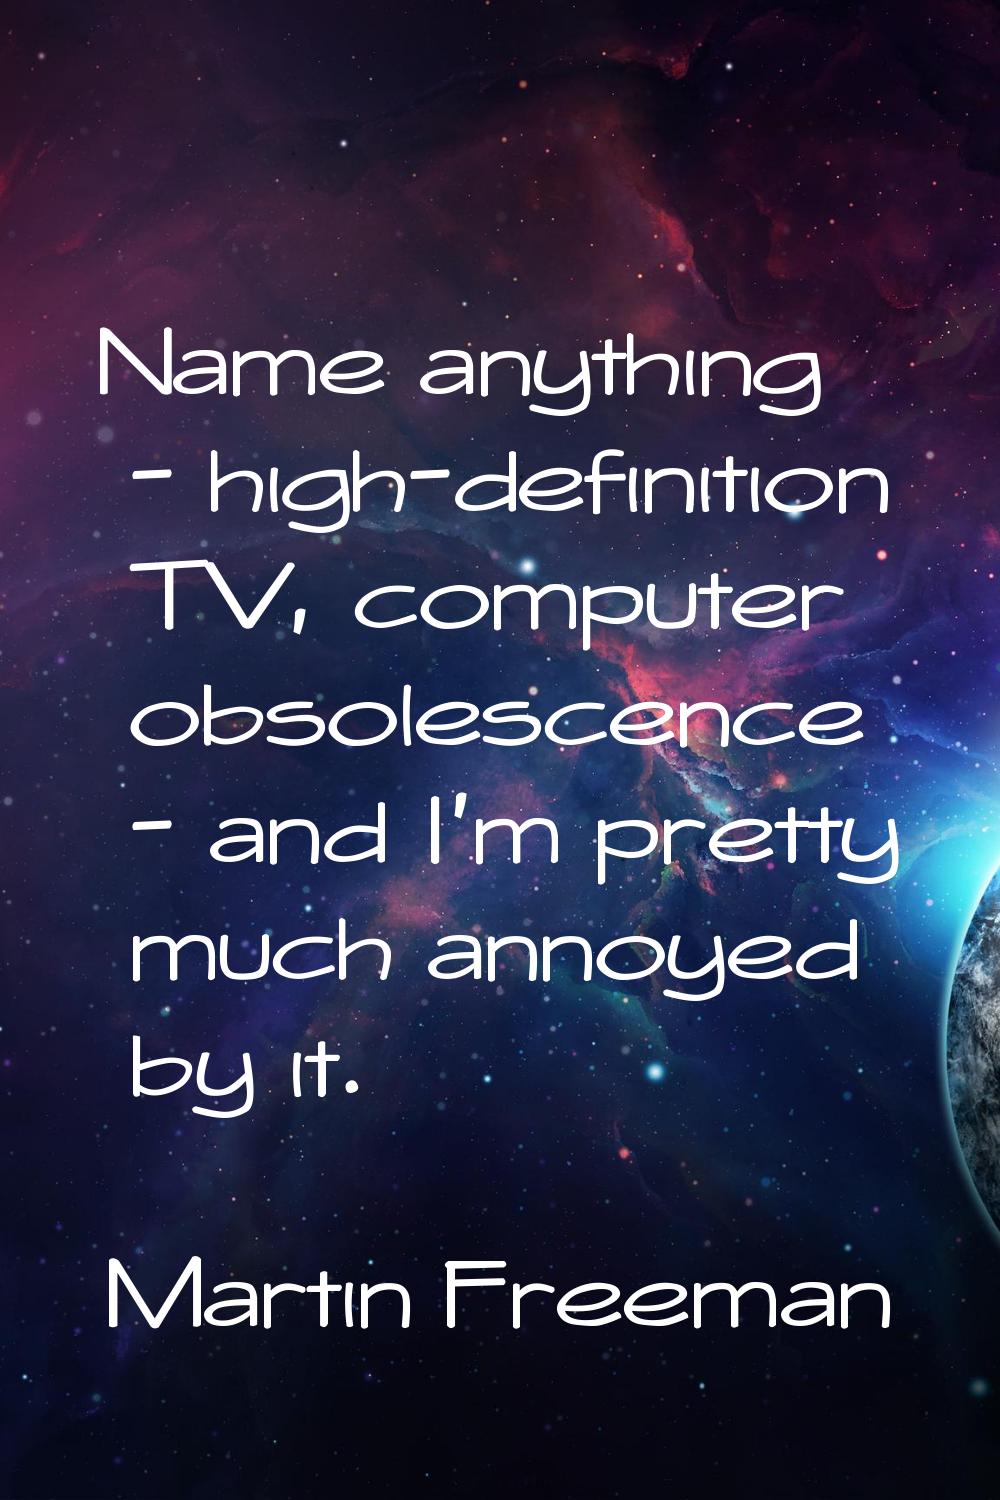 Name anything - high-definition TV, computer obsolescence - and I'm pretty much annoyed by it.